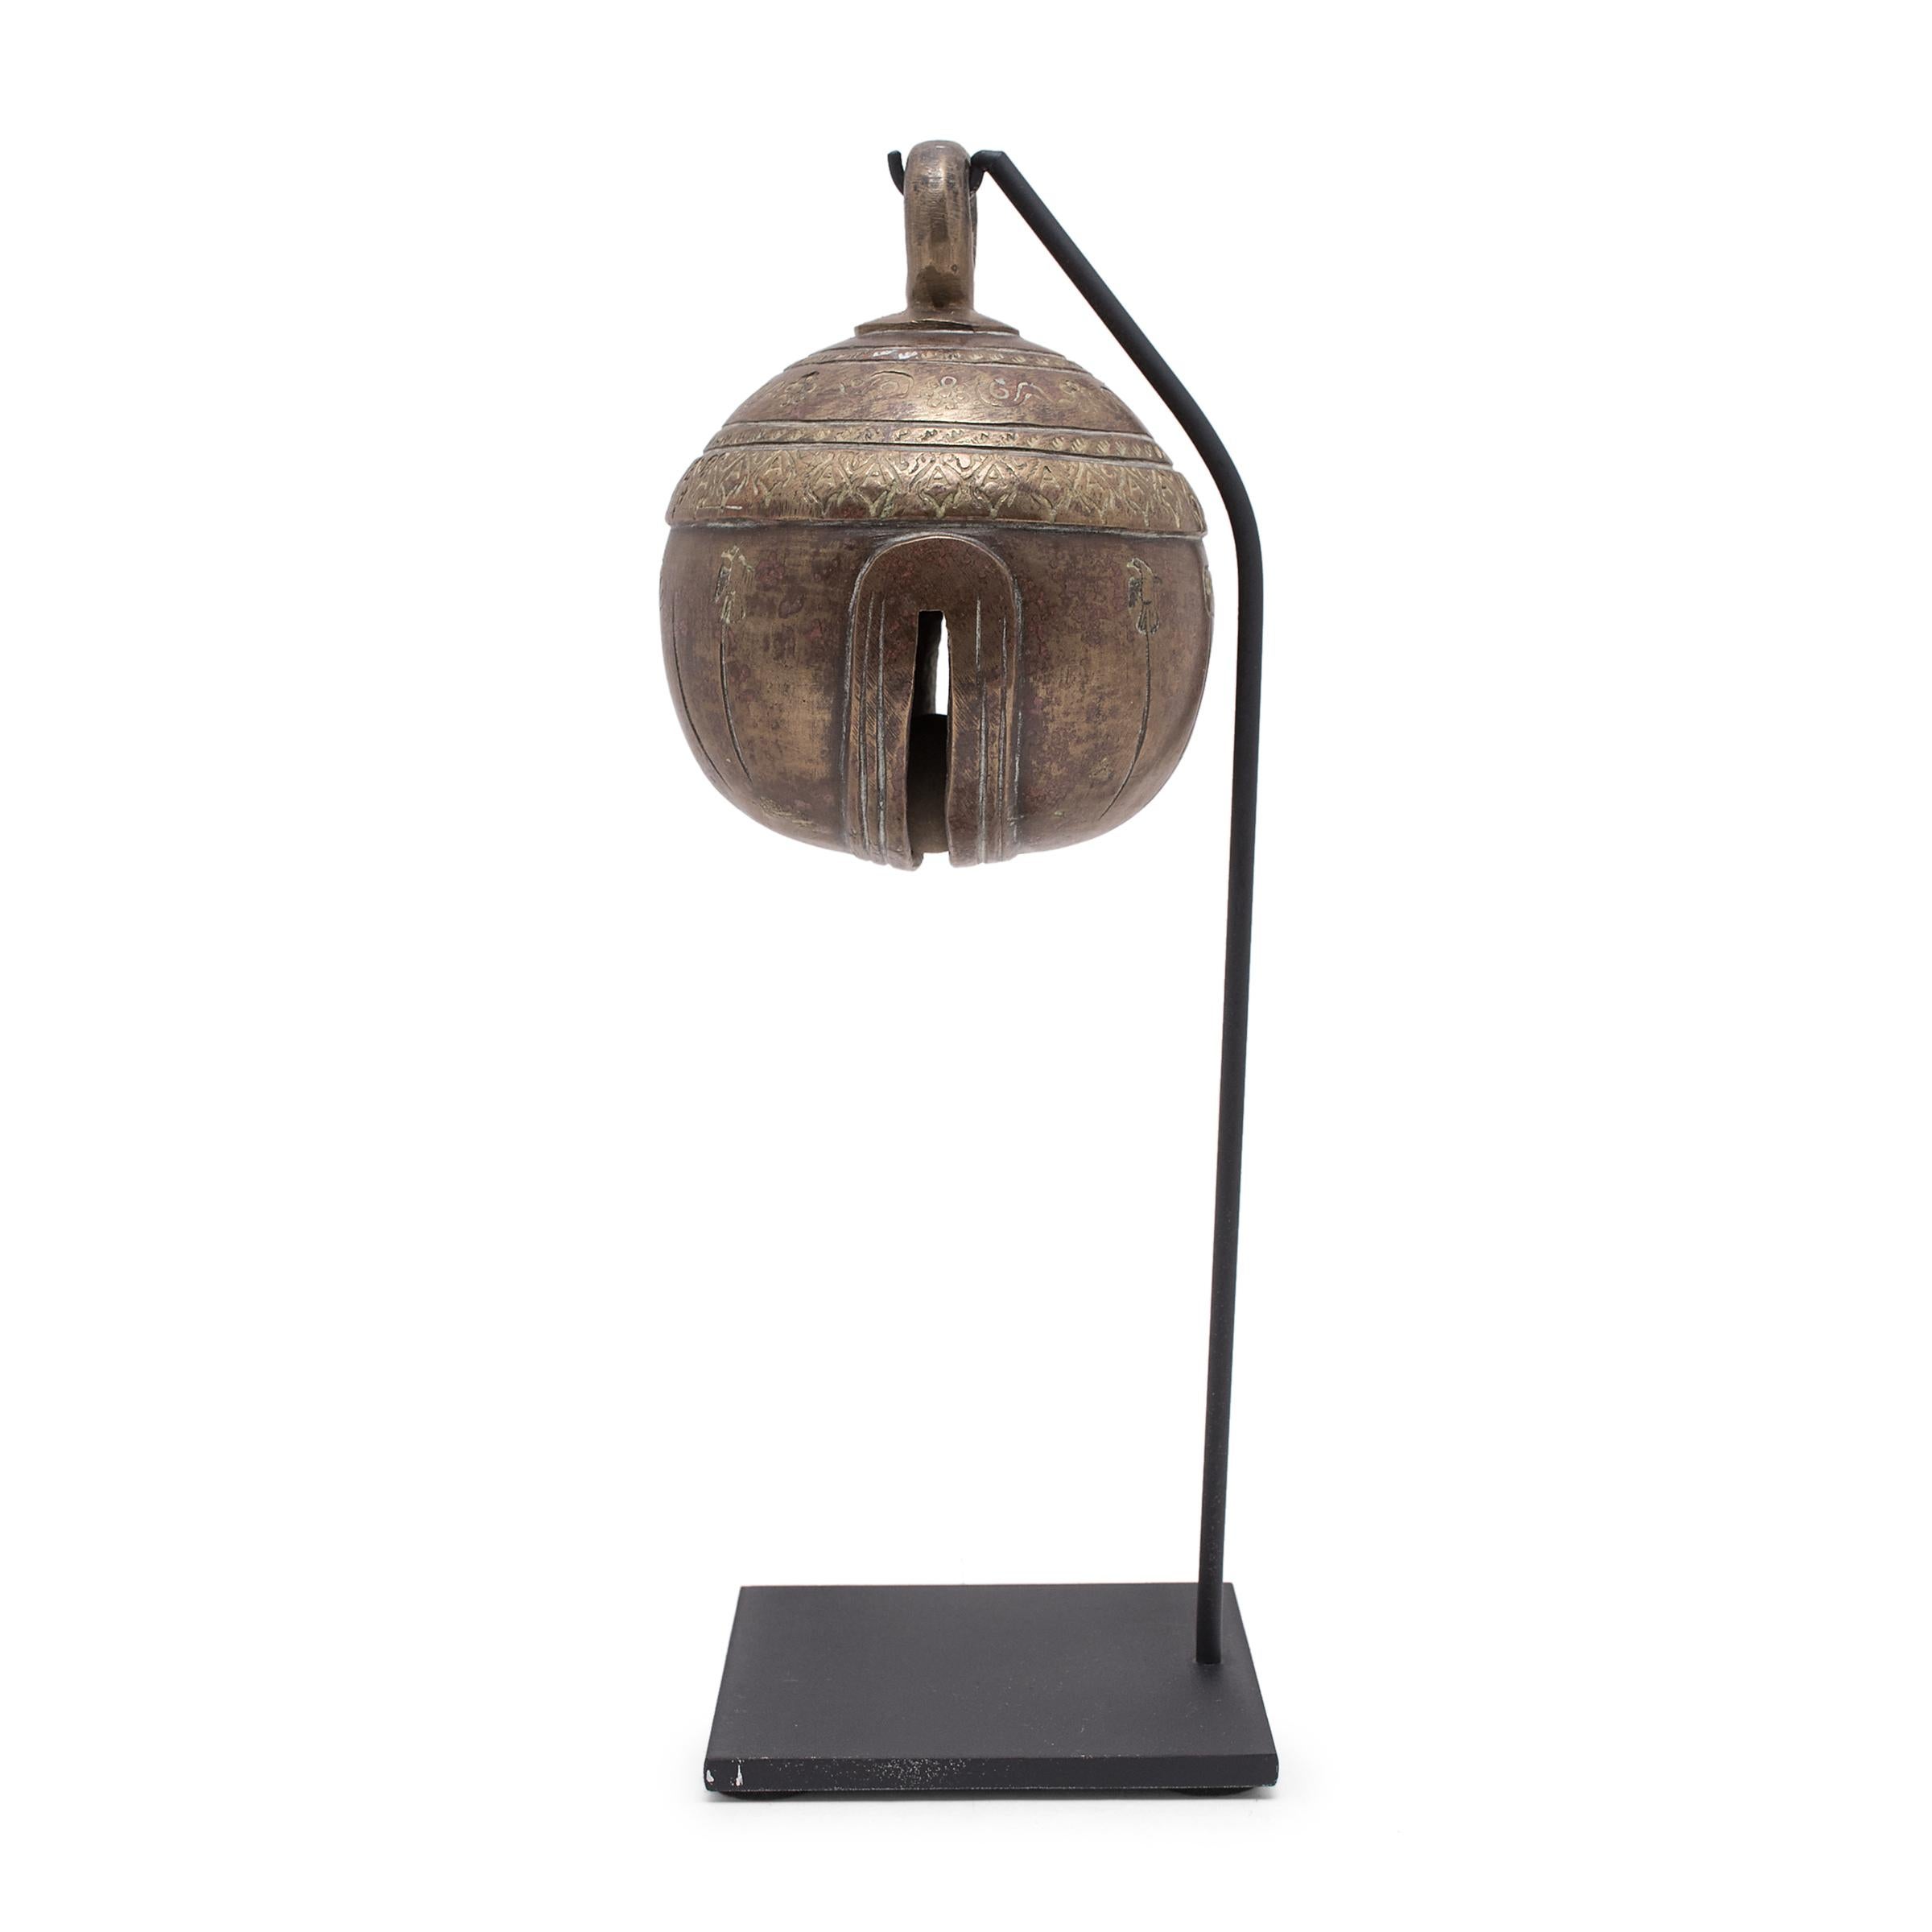 Known as chu, this large bronze bell was crafted in Burma and was used to track the movement of livestock. This distinctive spherical form was mostly worn by elephants so that they could be located after being set free to forage. Dated to the 19th